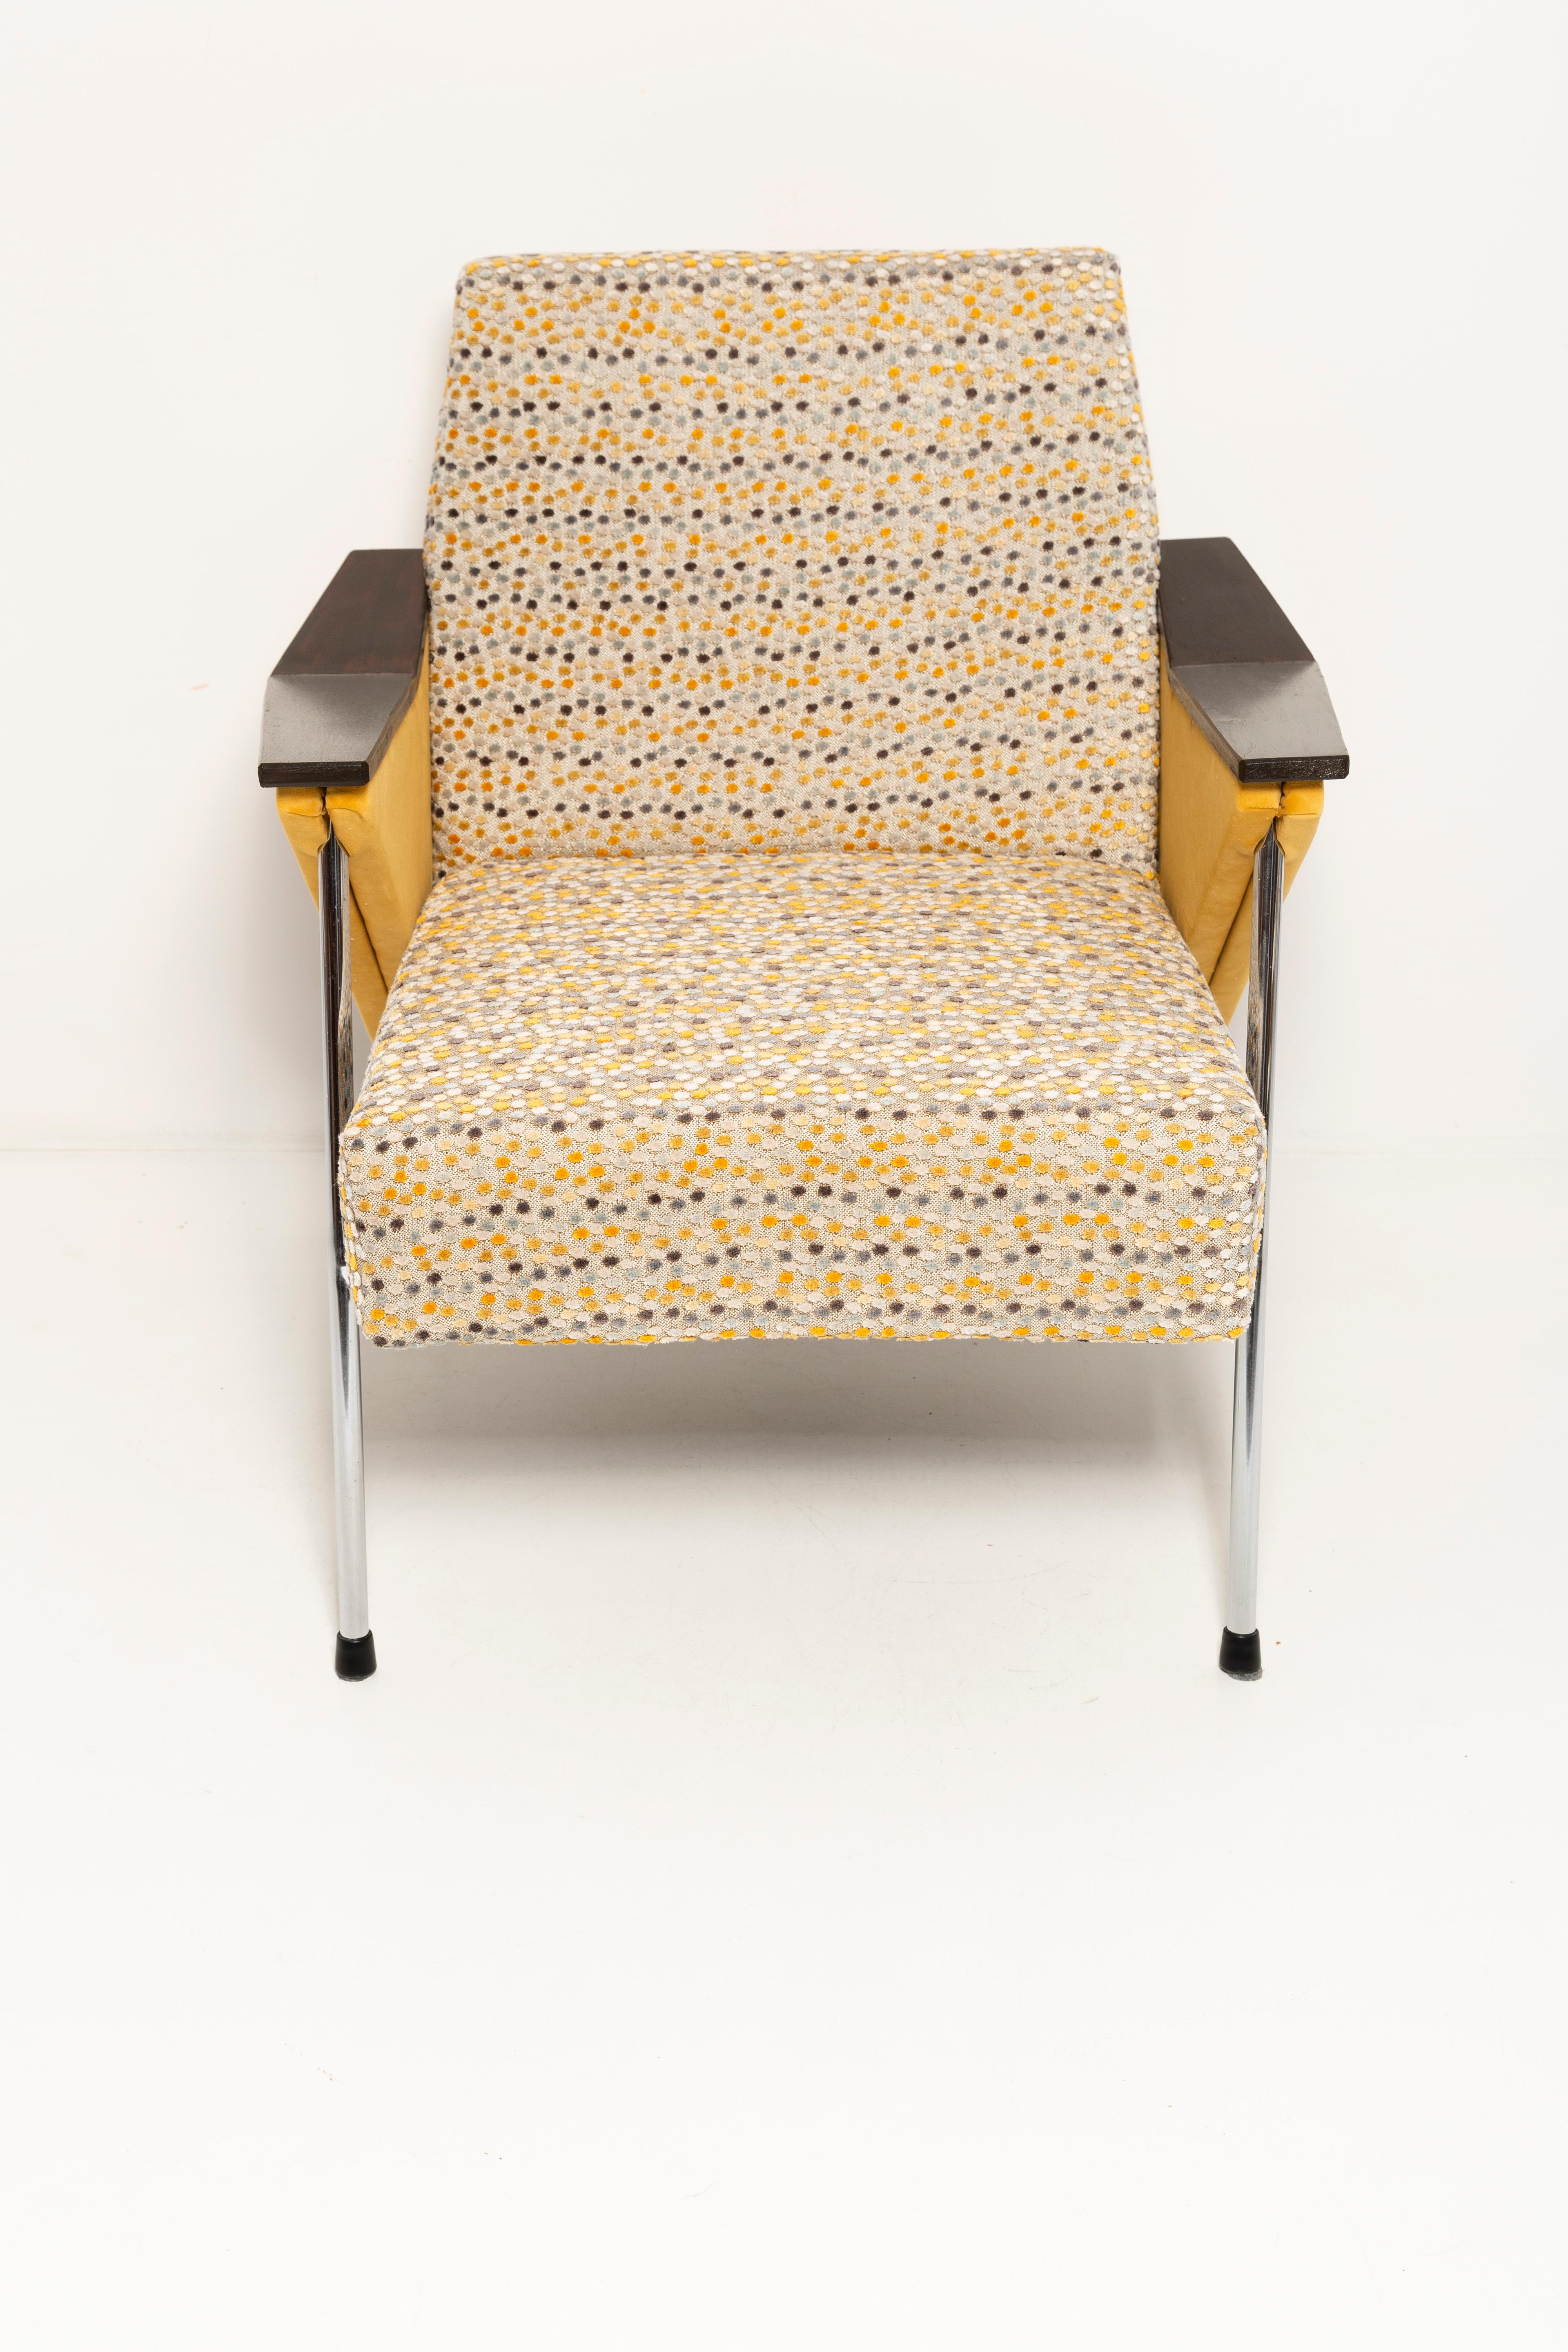 20th Century Pair of Mid Century Bat Armchairs, Yellow Dots, Bauhaus Style, Poland, 1970s. For Sale